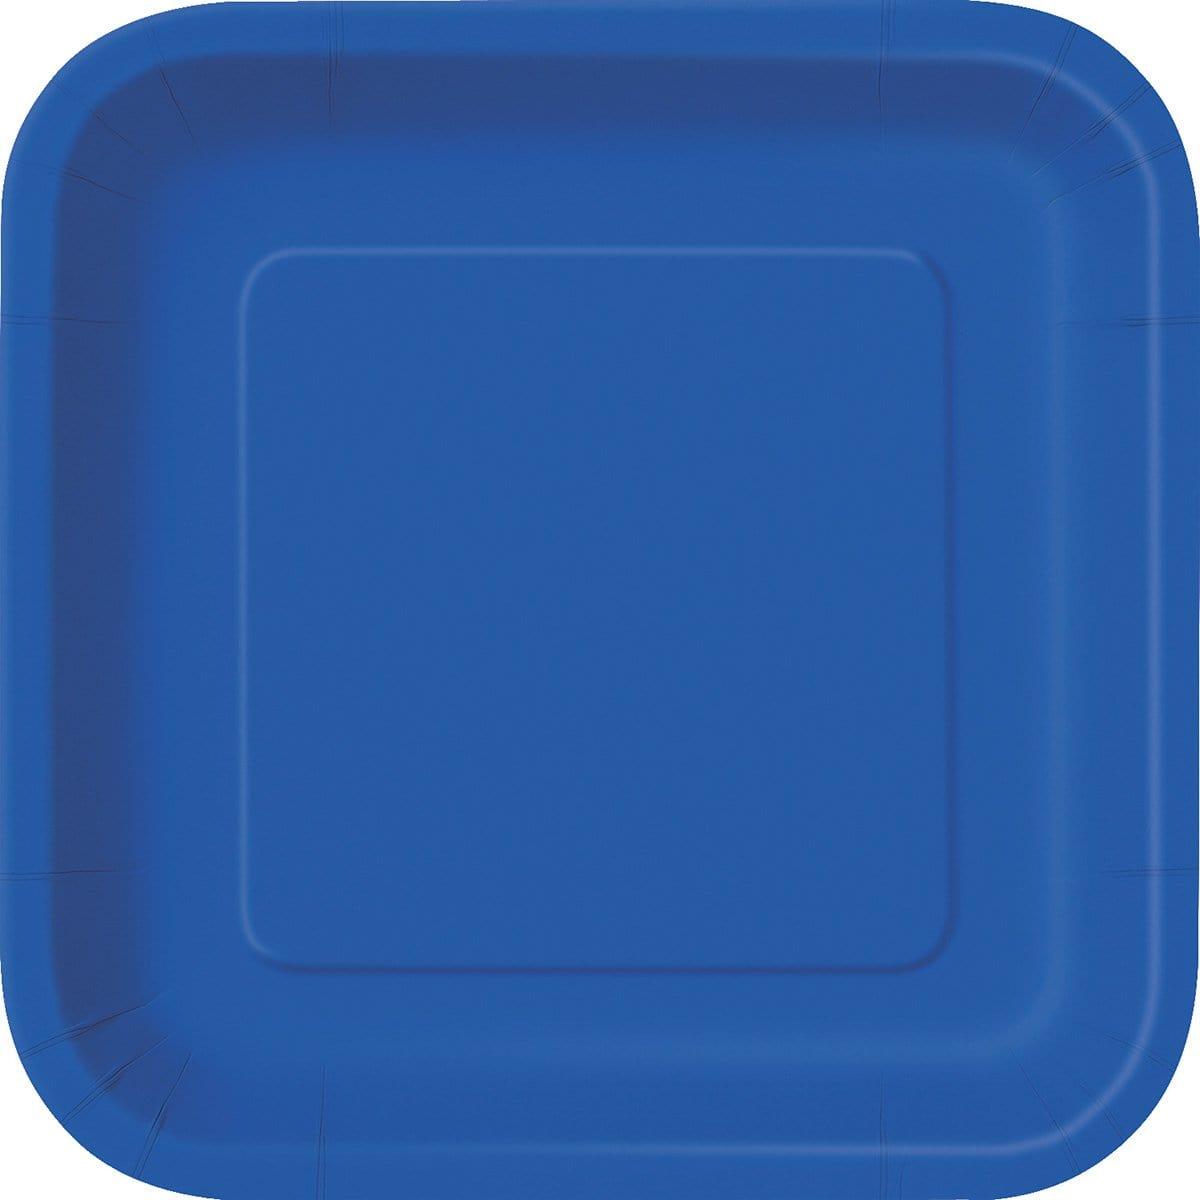 Buy Plasticware Square Paper Plates 7 In. - Royal Blue 16/pkg. sold at Party Expert